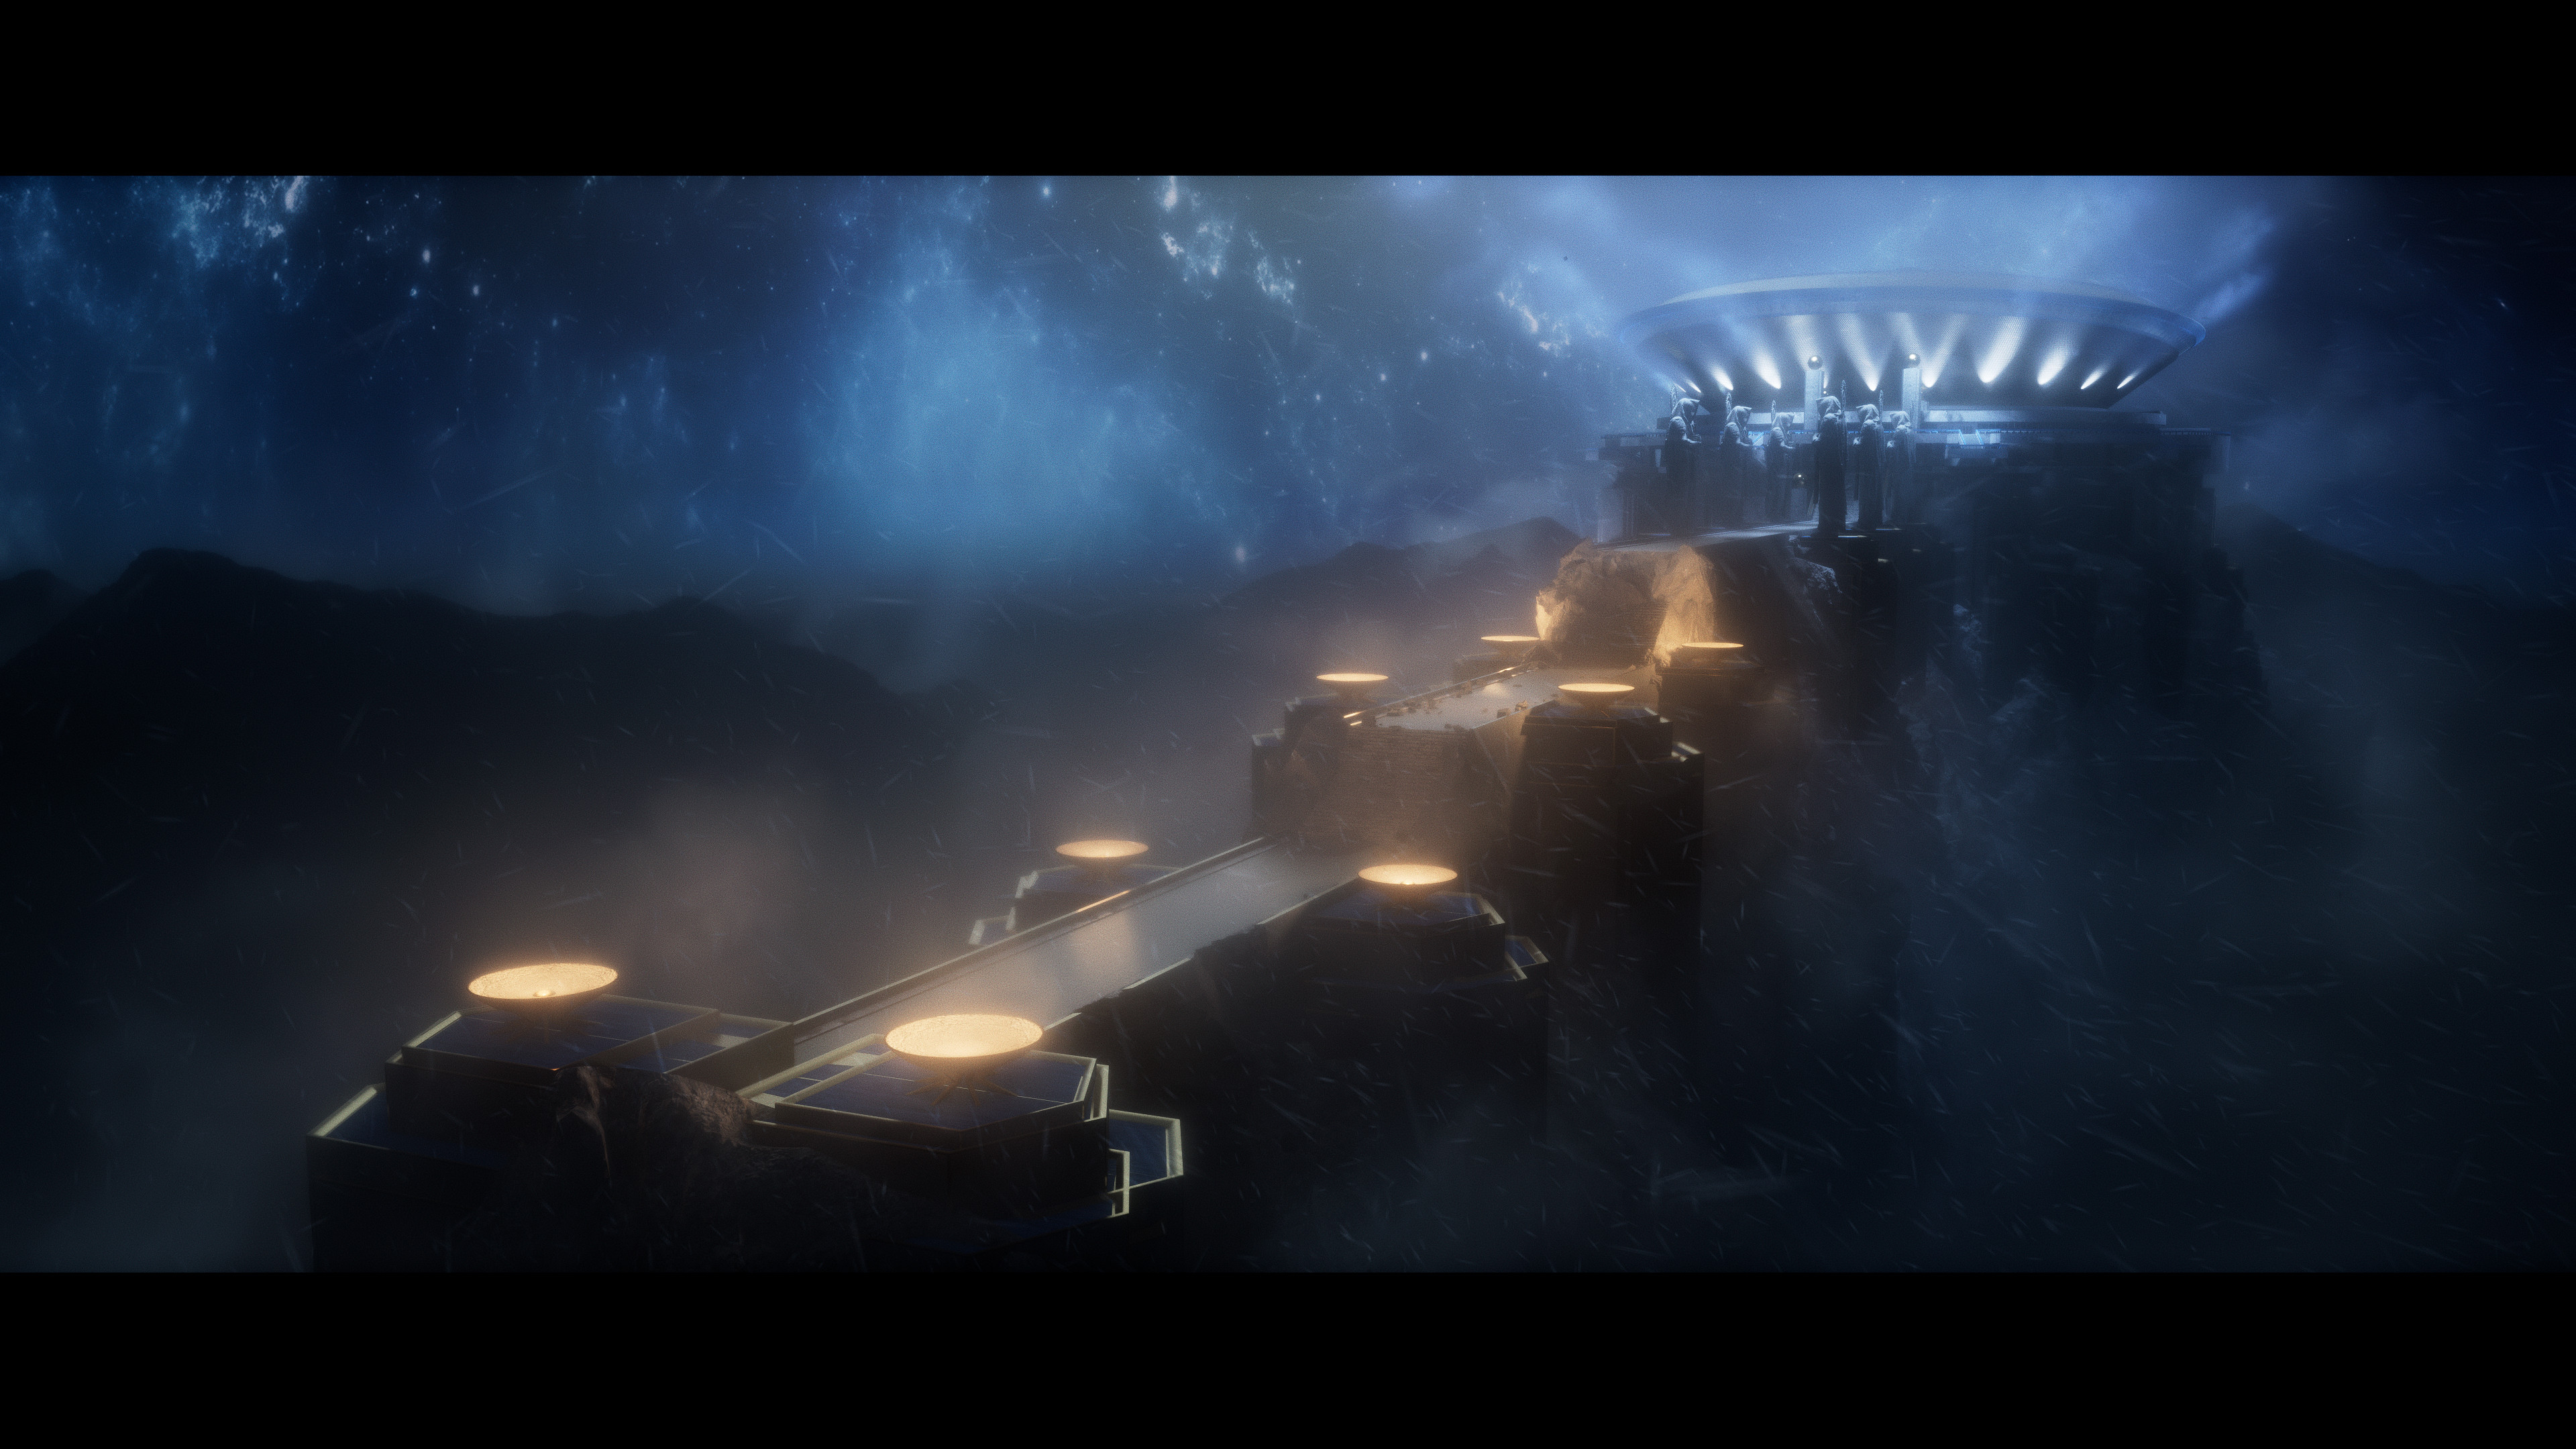 Master vizdev &amp; lighting I did for the arena environment before post and VFX was added. Rendered straight out of Unreal (Lumen real-time) with some light grade and film grain on top. Real-time snow was created from SkyCreator.